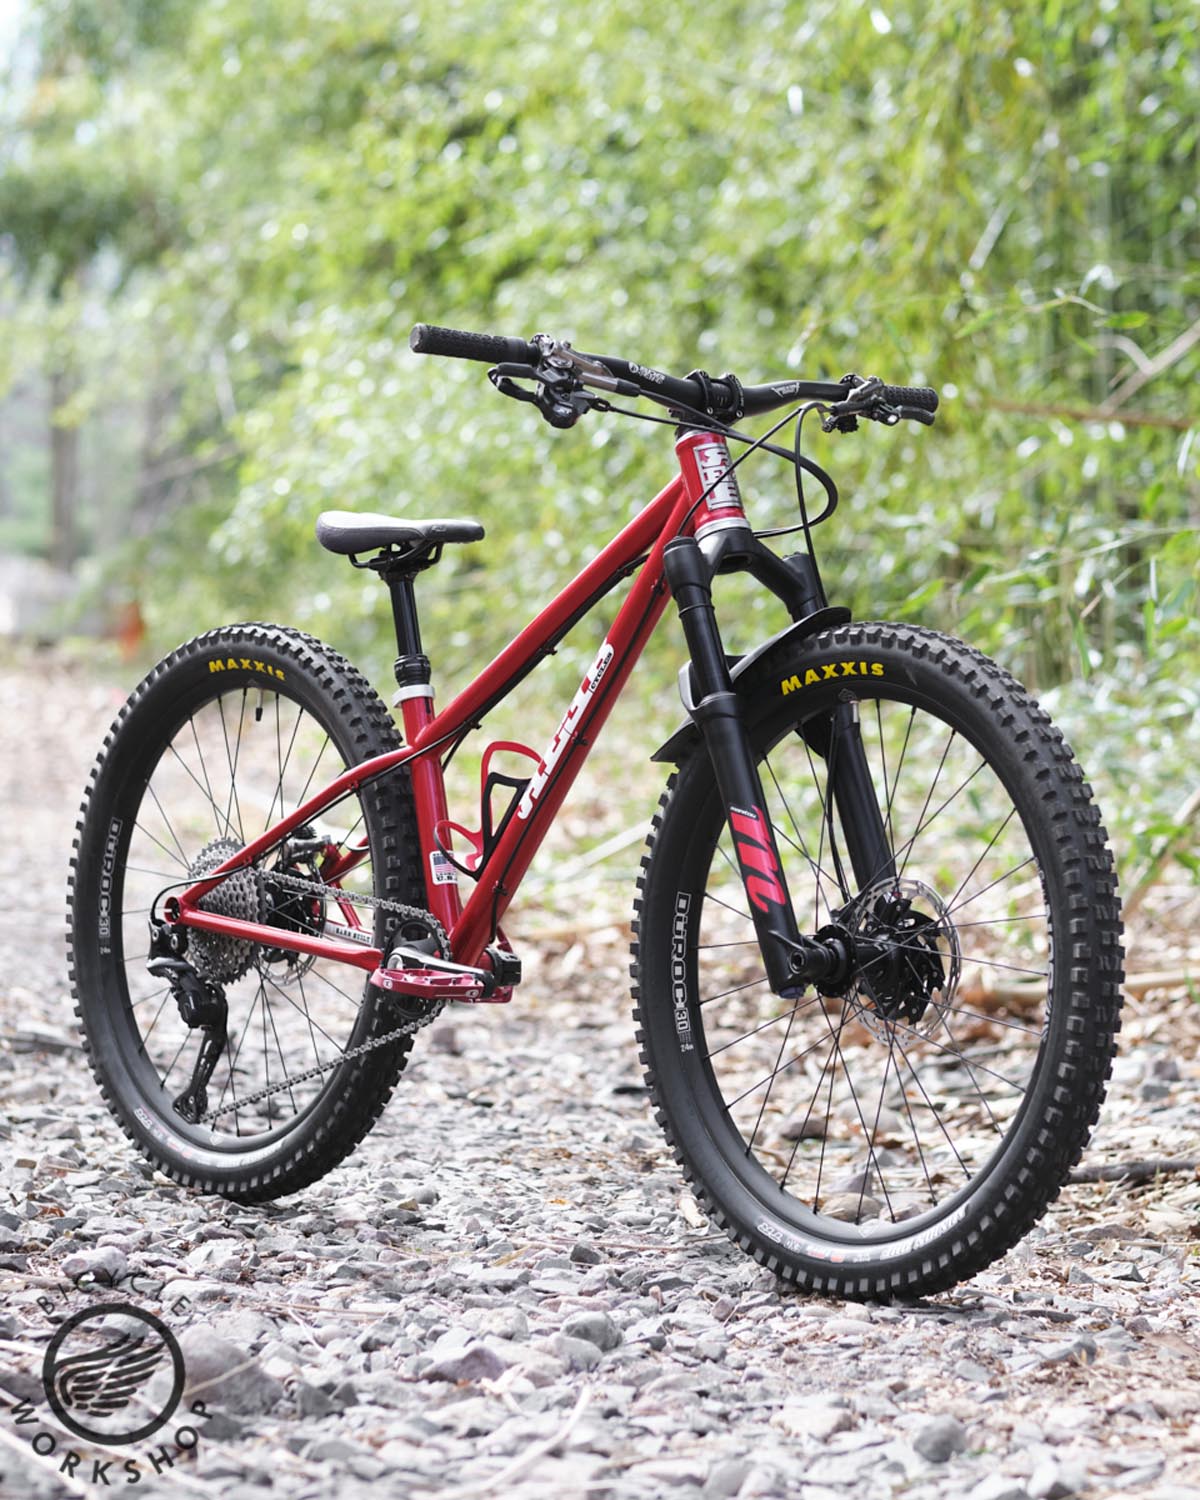 Build the next Trail Boss JR with dream kid's mountain bike from REEB Cycles